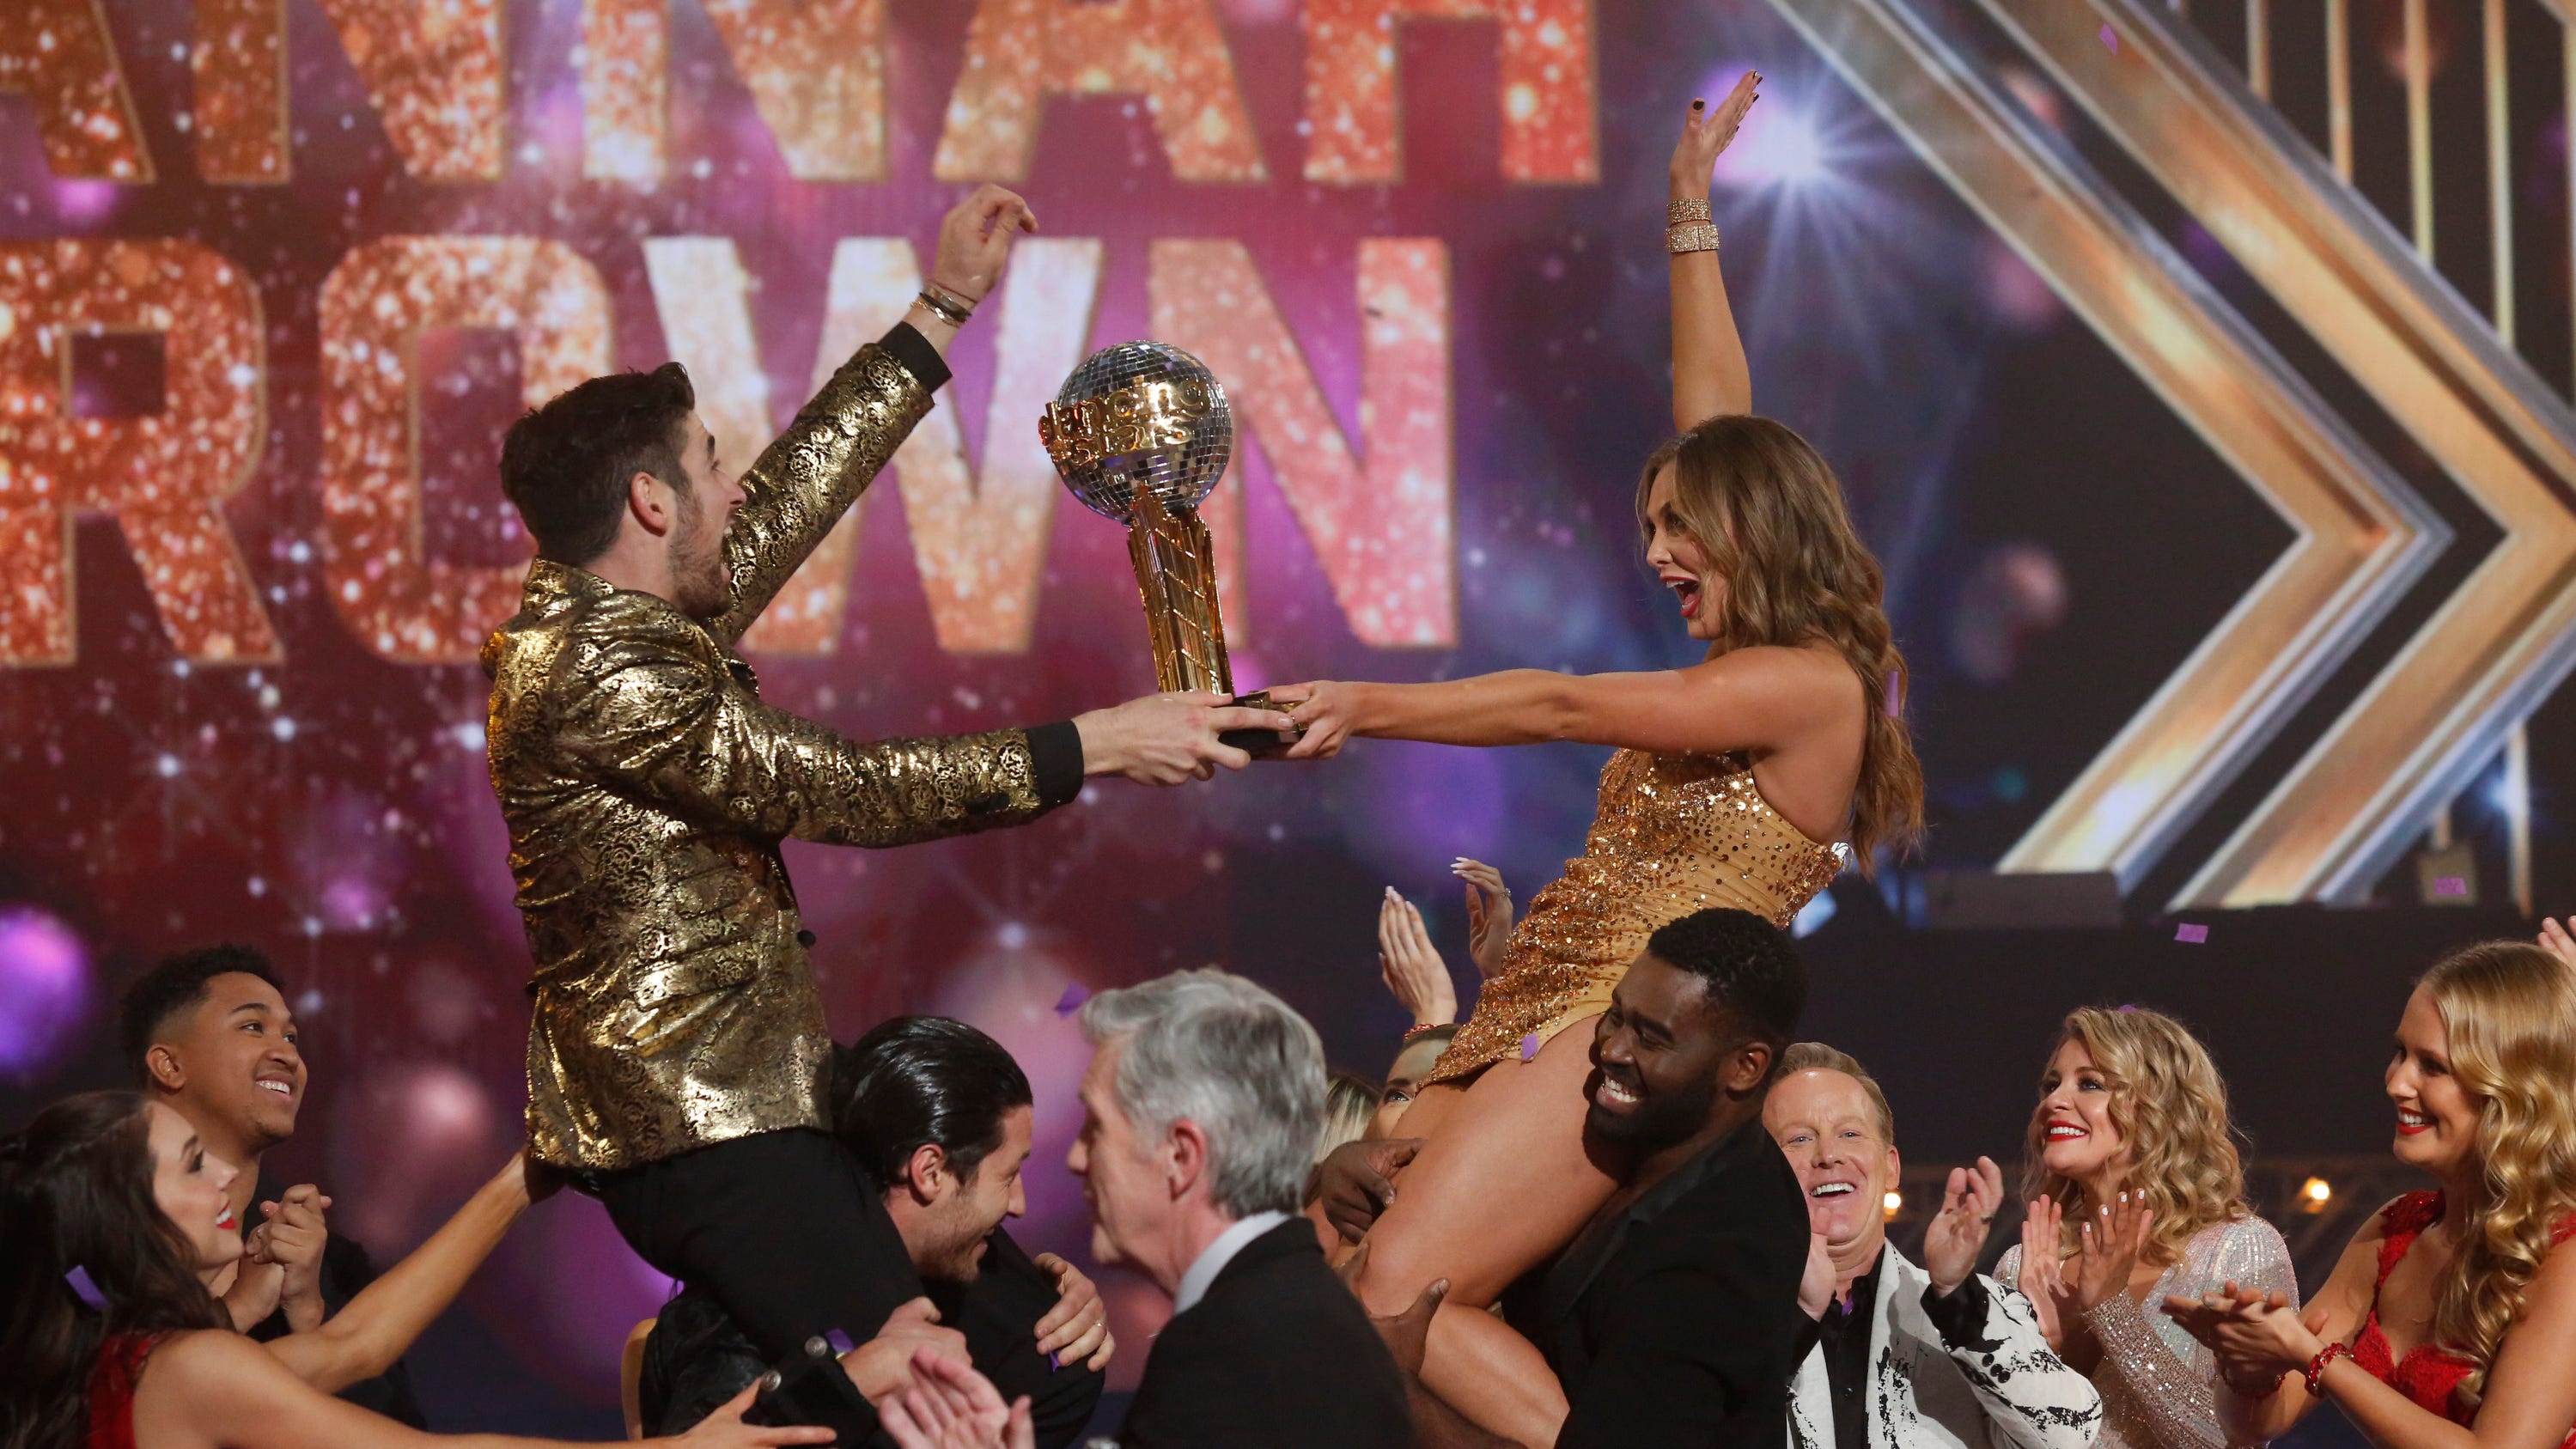 'Dancing With the Stars' finals Hannah Brown crowned the new champion